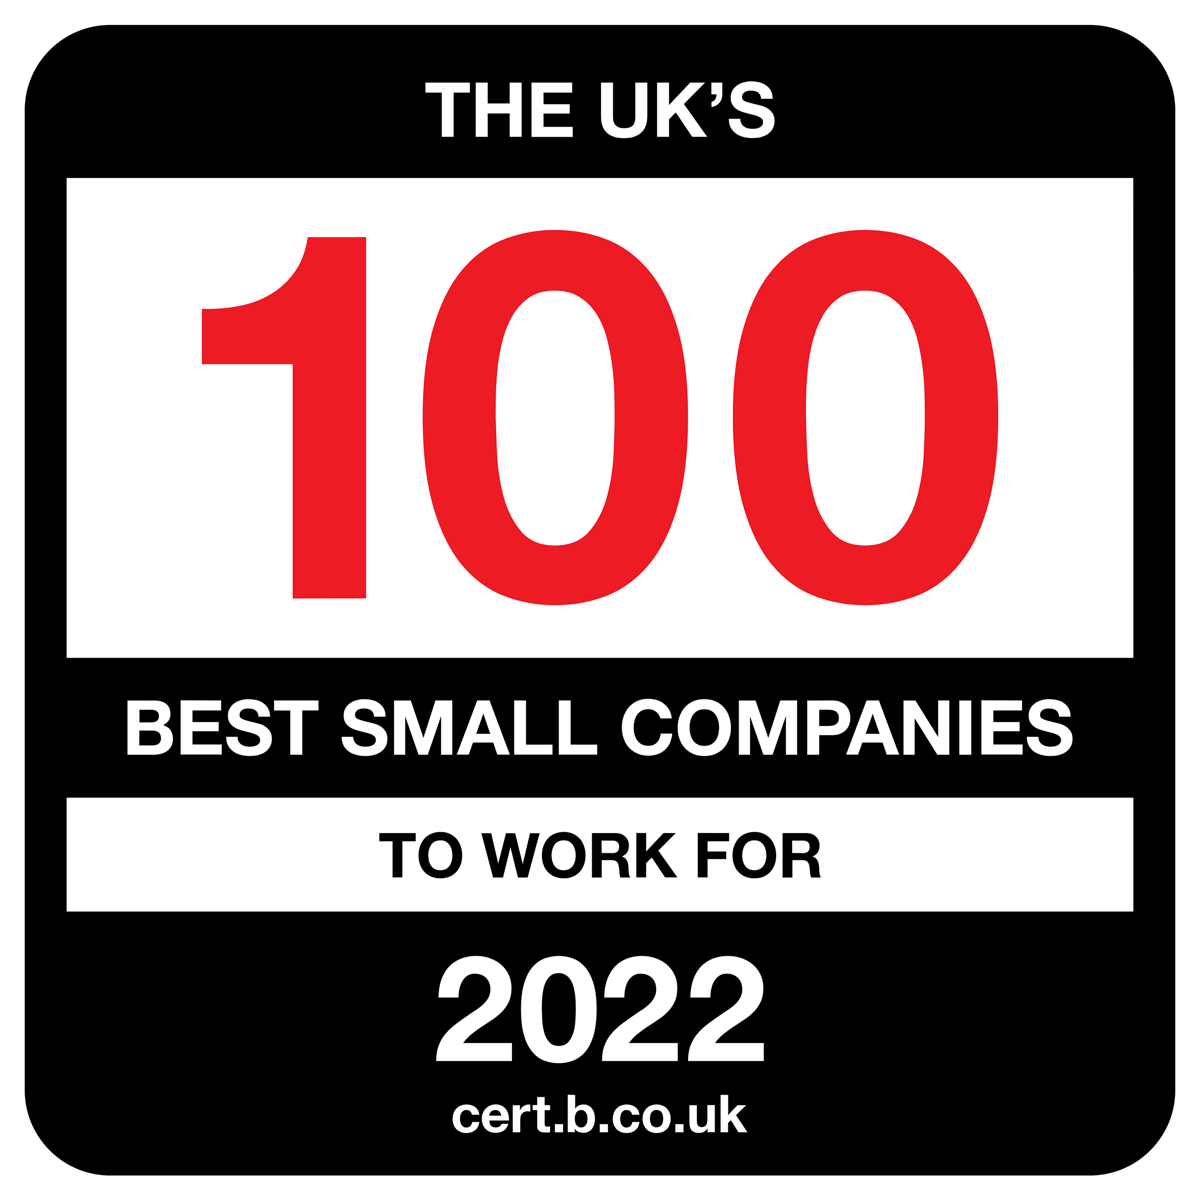 The UK's 100 Best Small Companies to Work For 2022